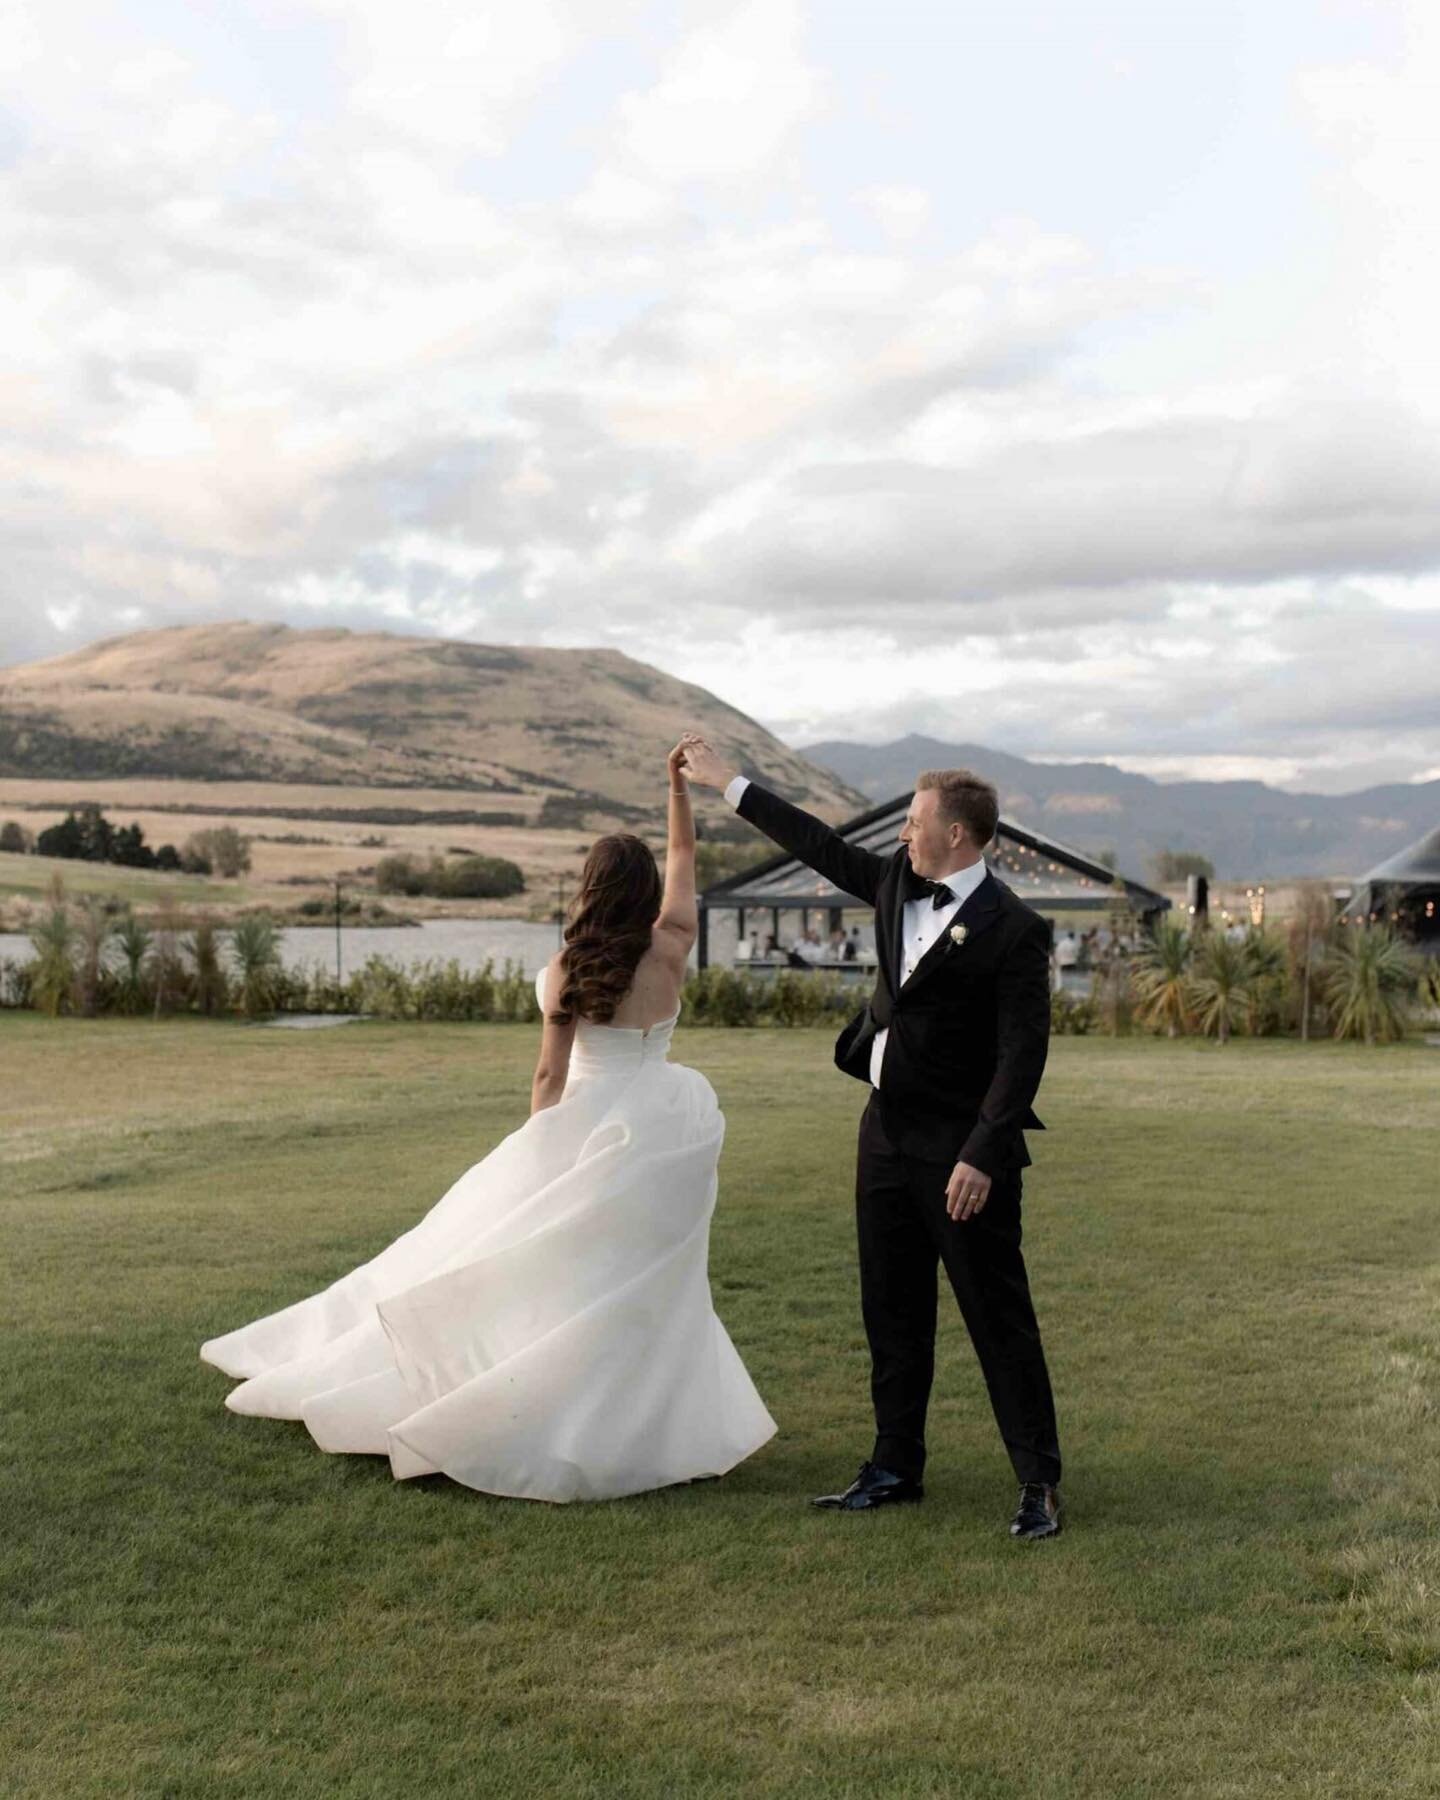 The beautiful Matt + Ella in love + spinning magic 4.03.2023 @wonderandfull_events ✨🏔️✨
.
.
.

#letsdance #love #lover #youaremagical #mountainlovers #clearmarquee #destinationwedding #nzwedding #weddingday #wedding #weddingdress #bestdayever #letsp